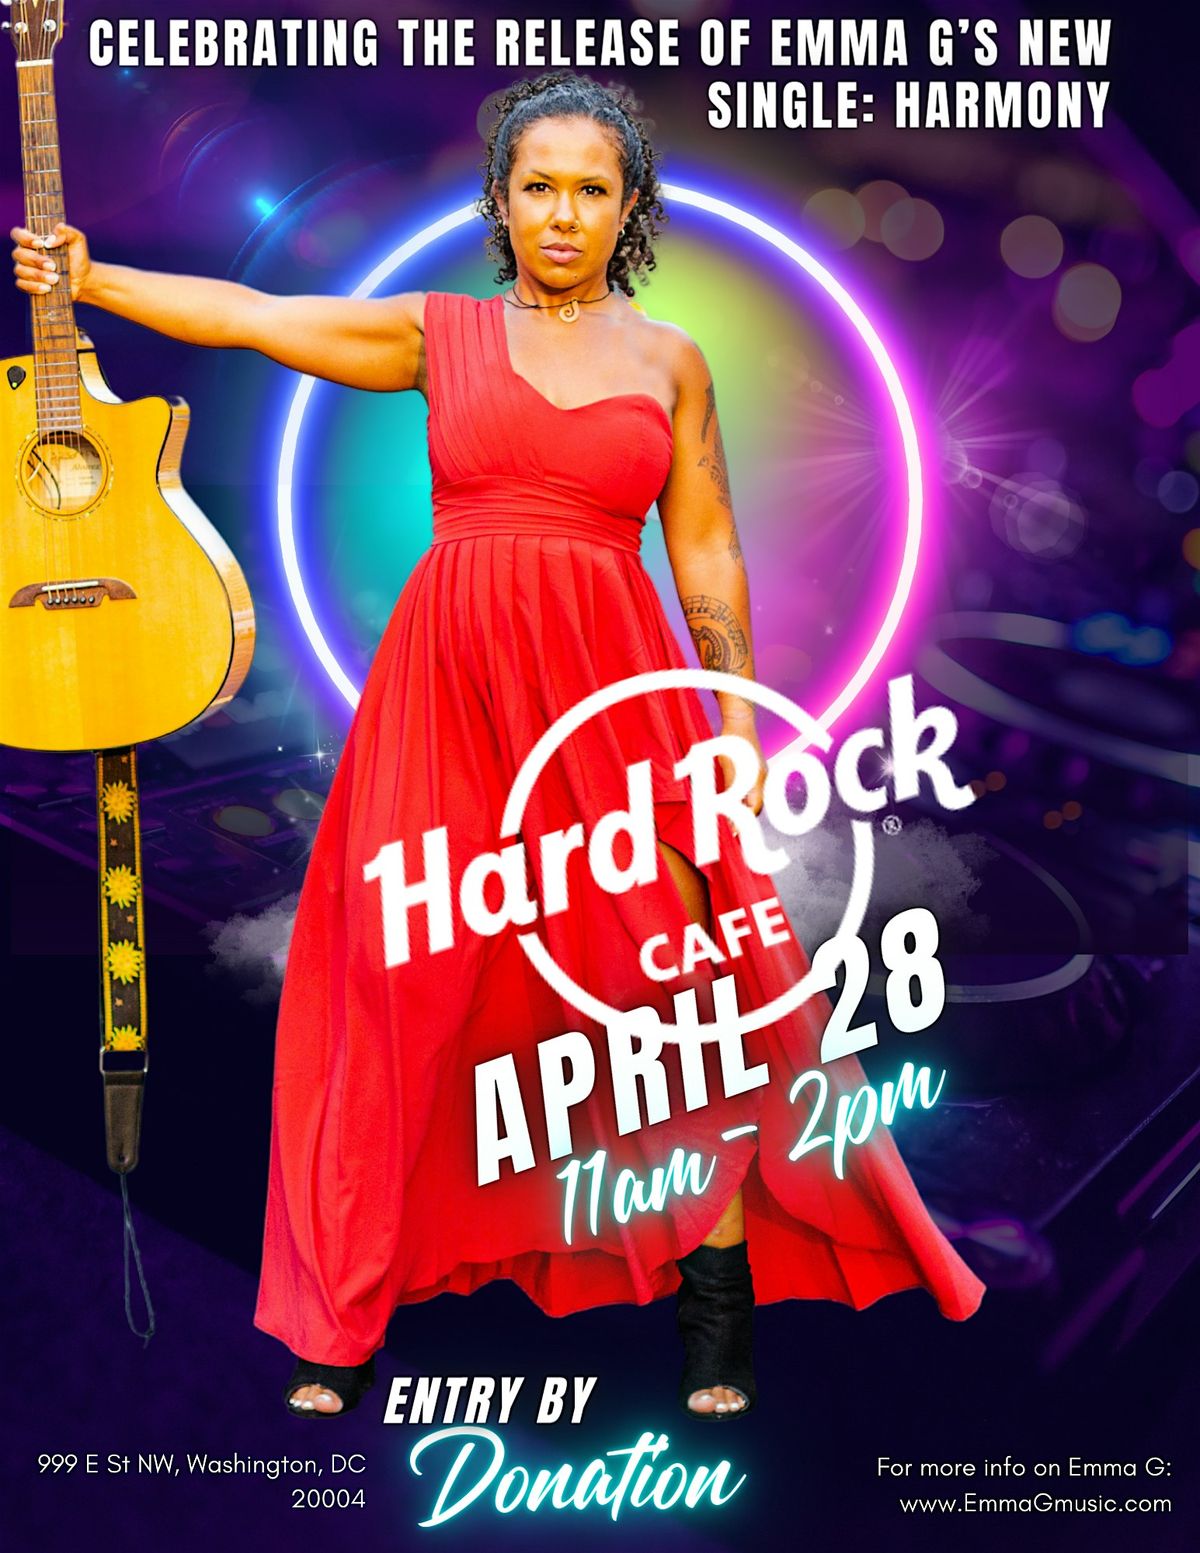 "Harmony" Single Release Show at Hard Rock Cafe